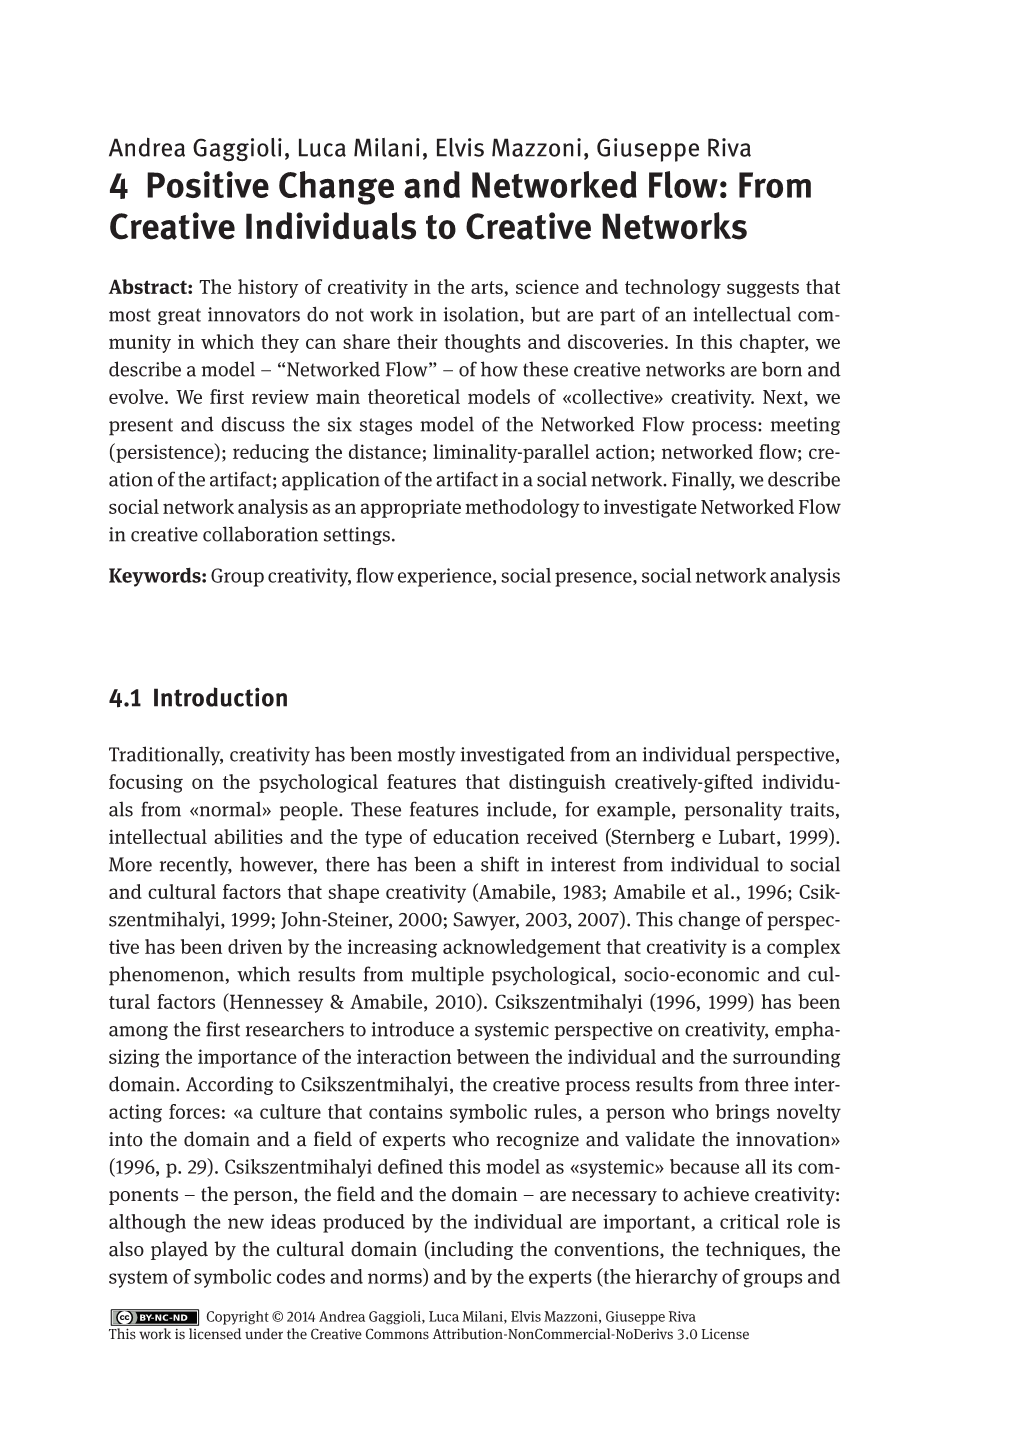 4 Positive Change and Networked Flow: from Creative Individuals to Creative Networks